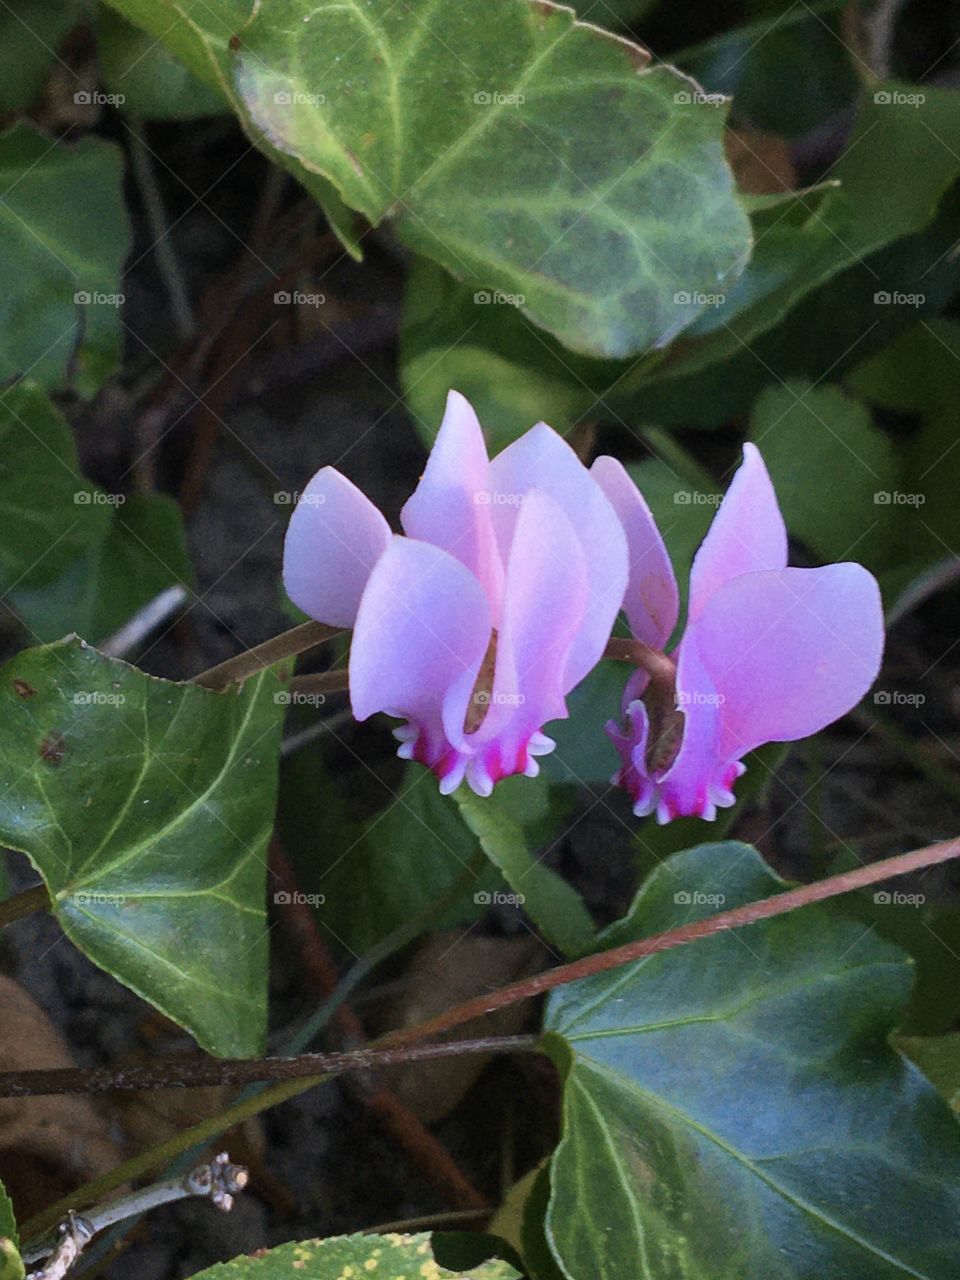 Shy cyclamen blooming in the ivy shadow